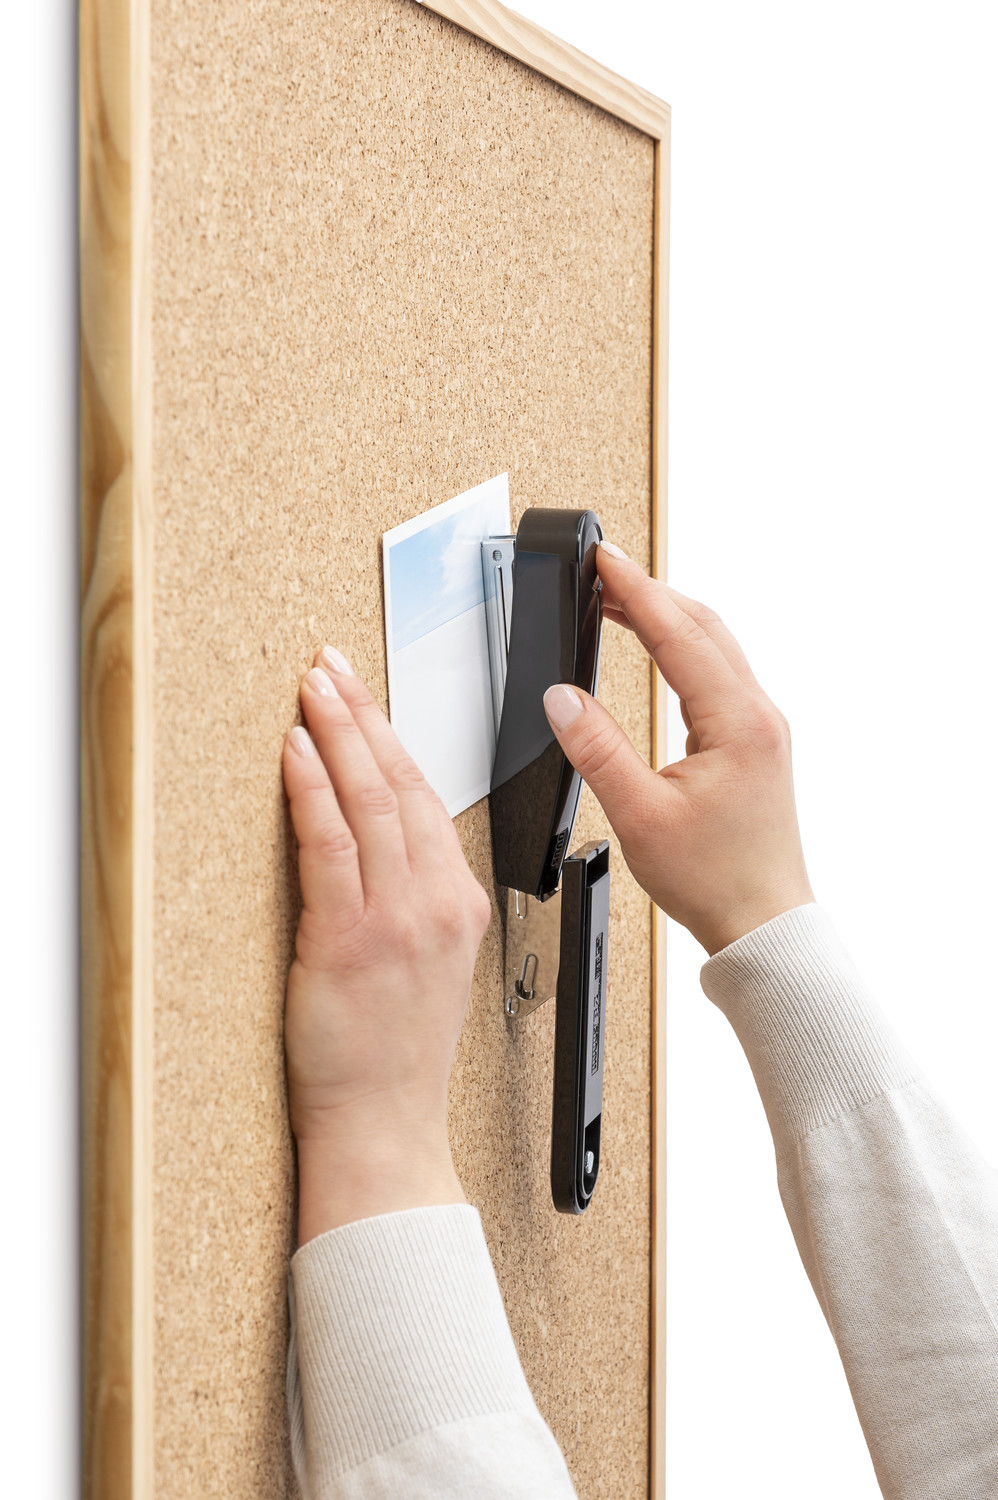 Nailing makes it easy to tack e.g. notices, photos and to a cork pin board.